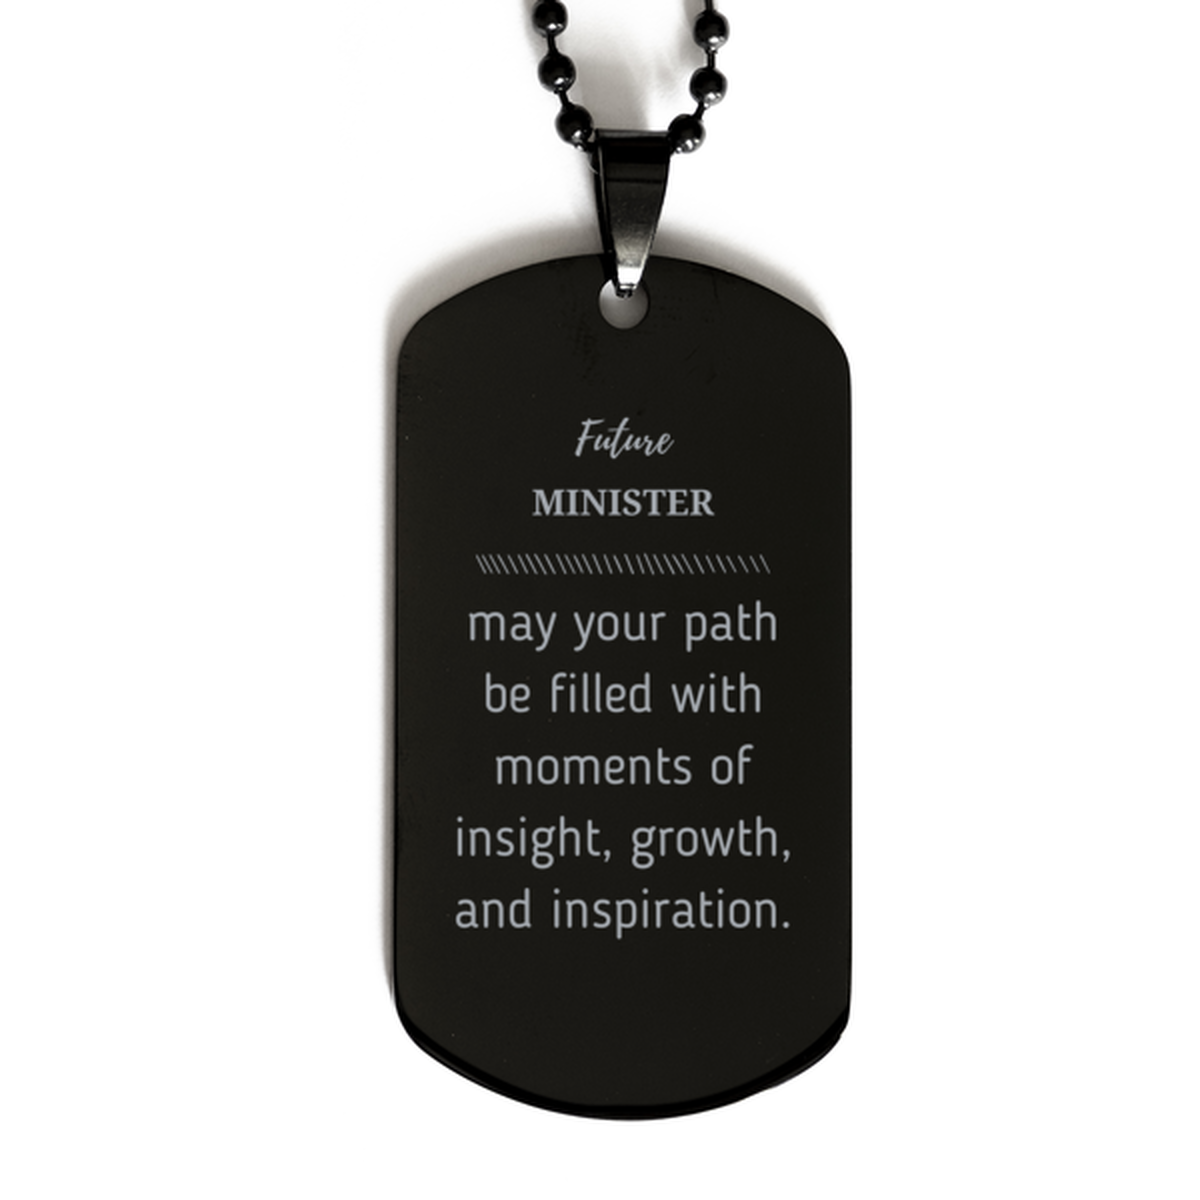 Future Minister Gifts, May your path be filled with moments of insight, Graduation Gifts for New Minister, Christmas Unique Black Dog Tag For Men, Women, Friends